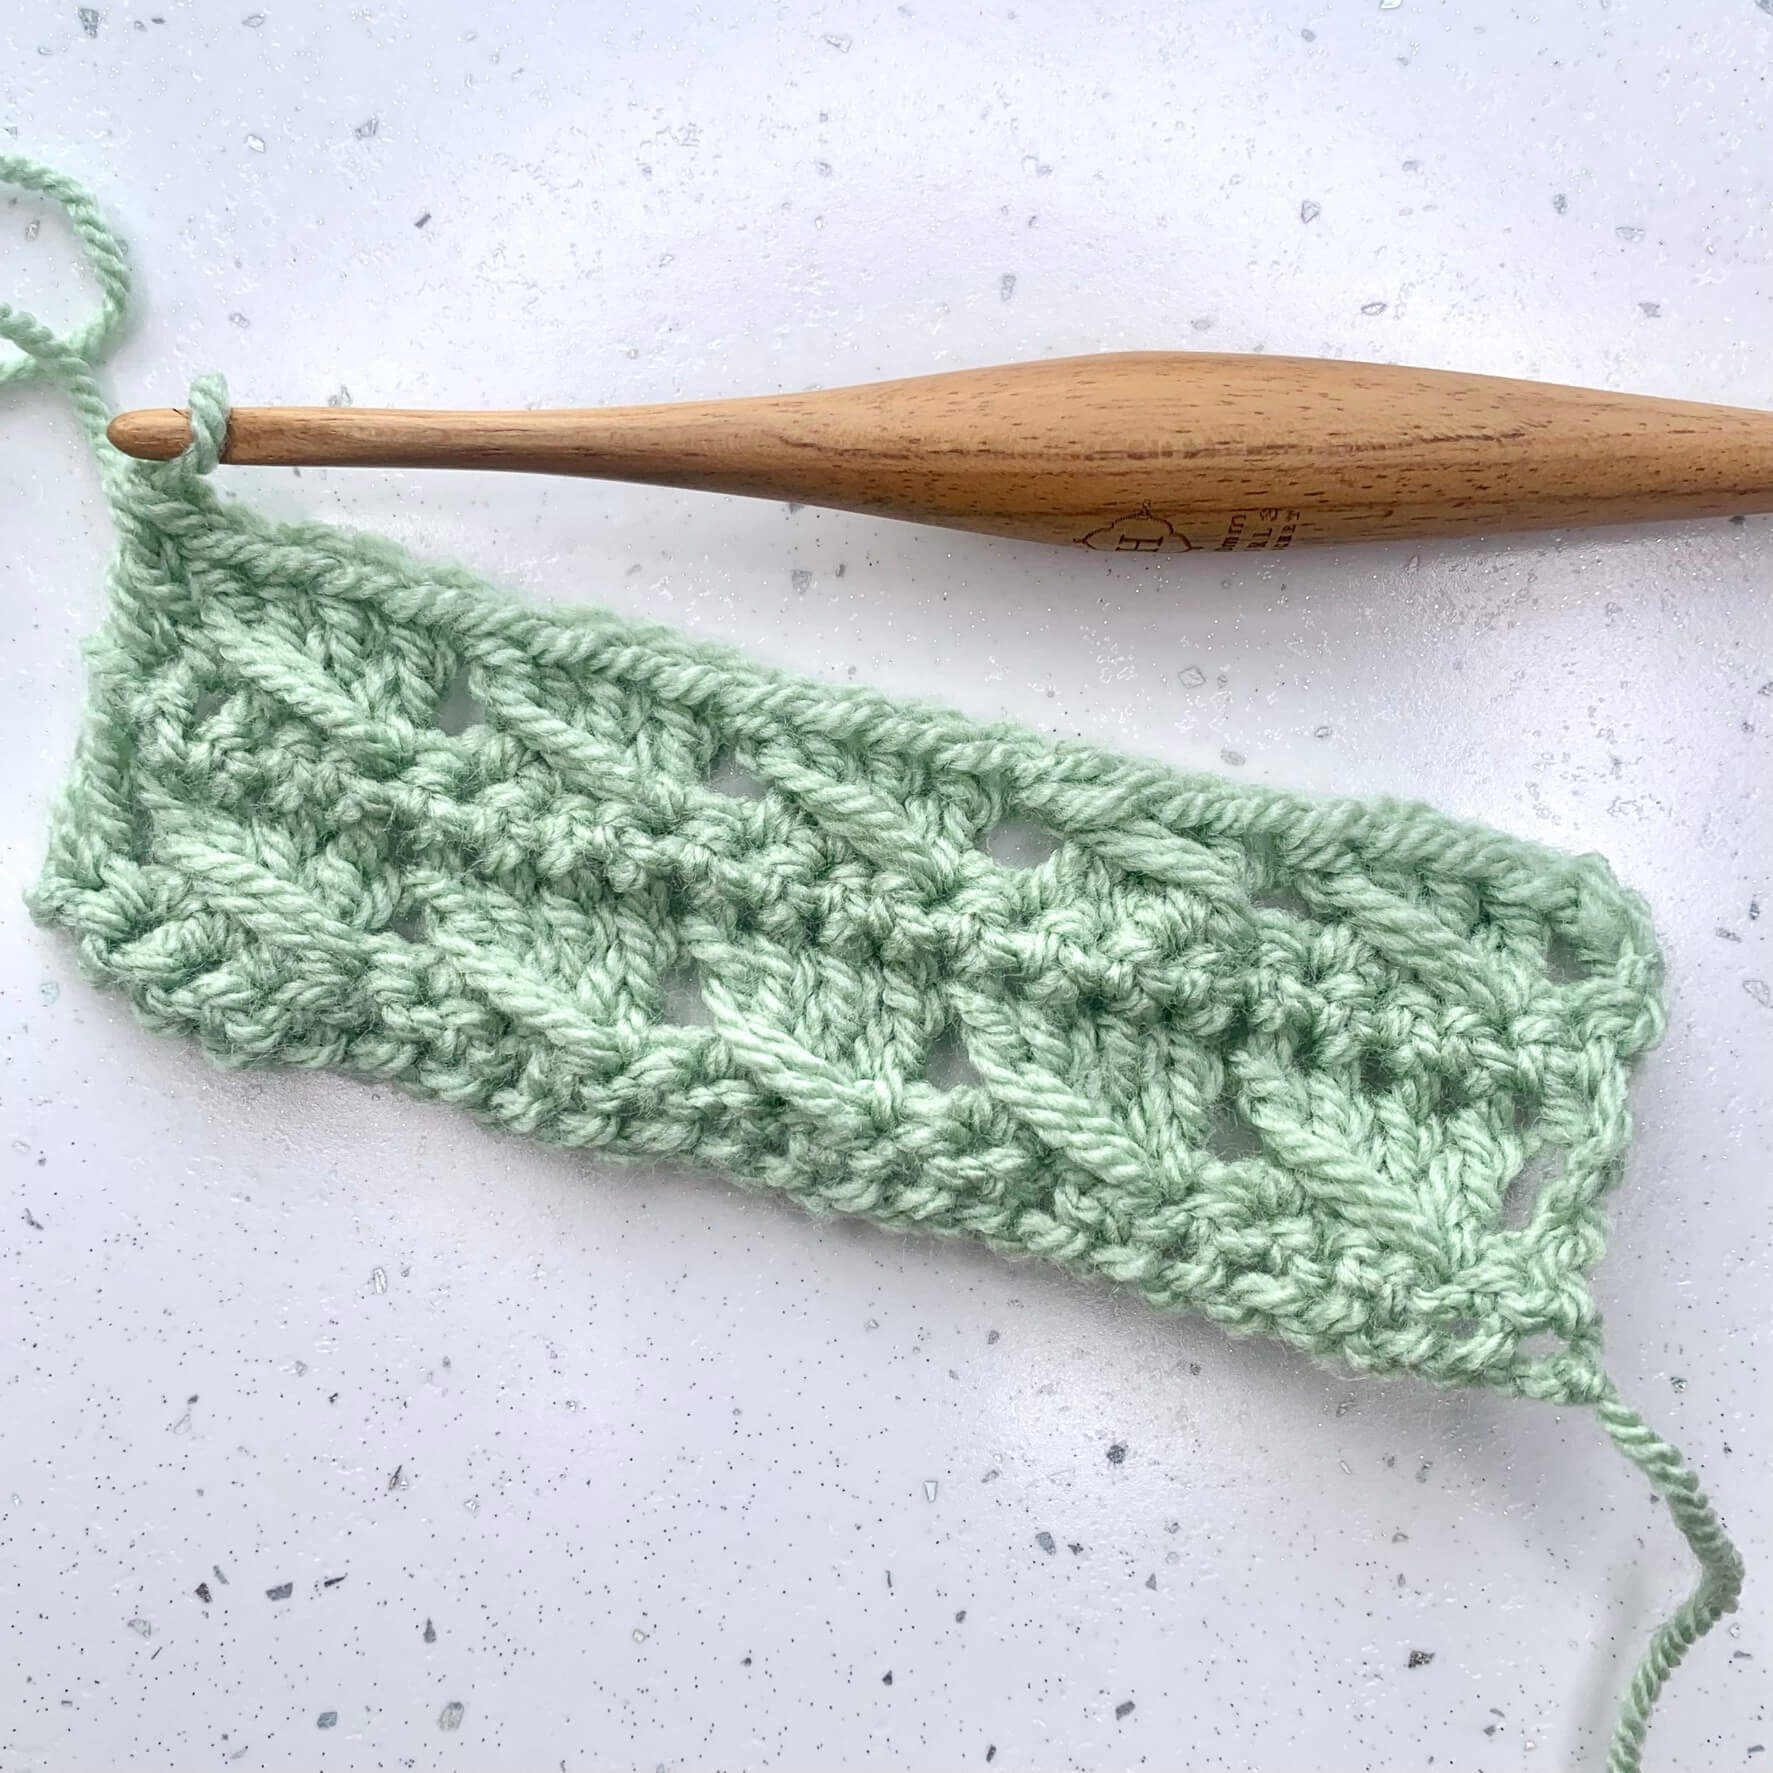 How to crochet the cable stitch